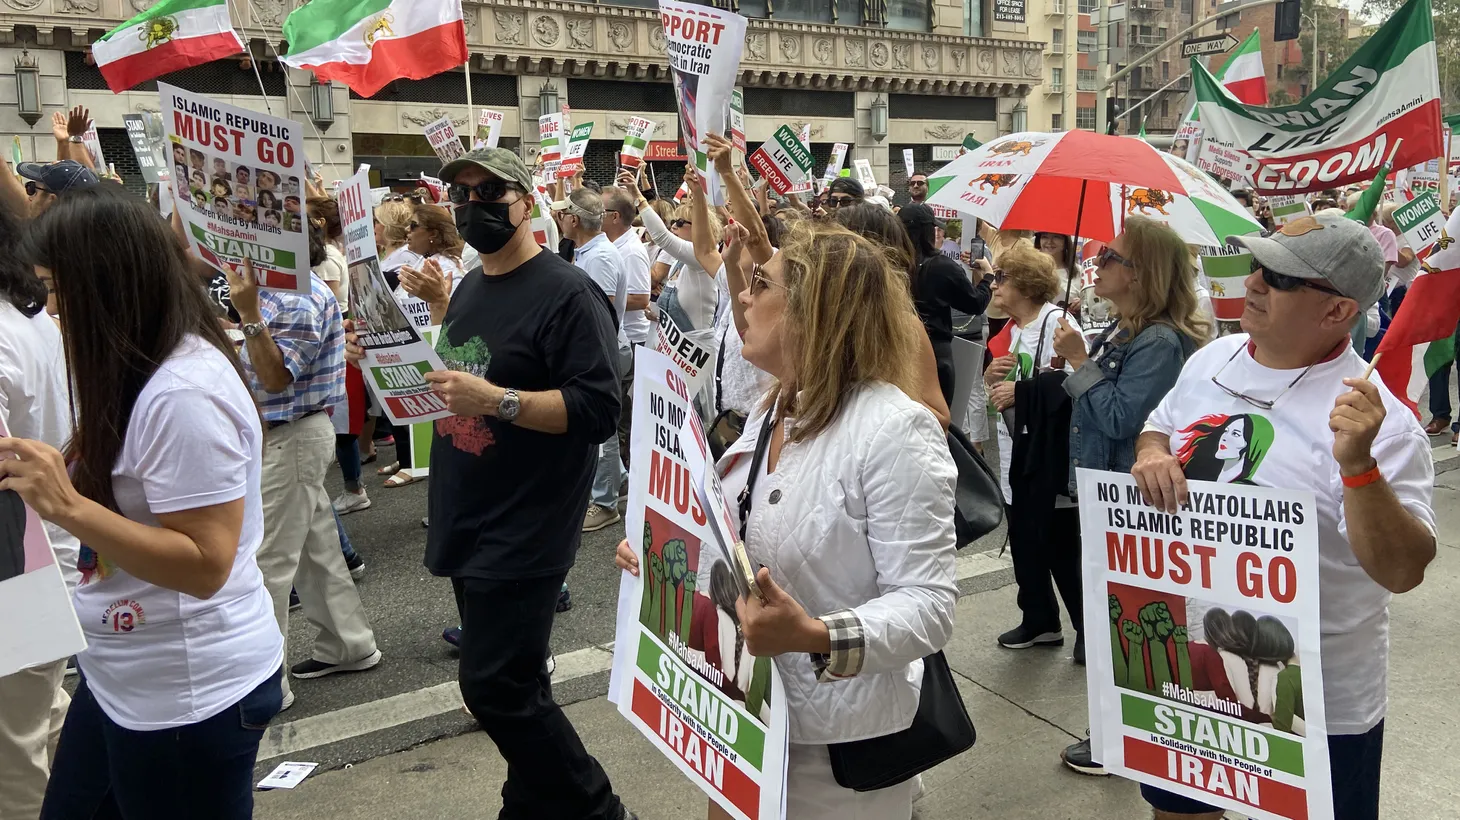 “They [Angeleno protesters] want the people of Iran to know that they are marching side by side. That there is full solidarity and support of the movement,” Lisa Daftari, Iranian American journalist and editor at The Foreign Desk.